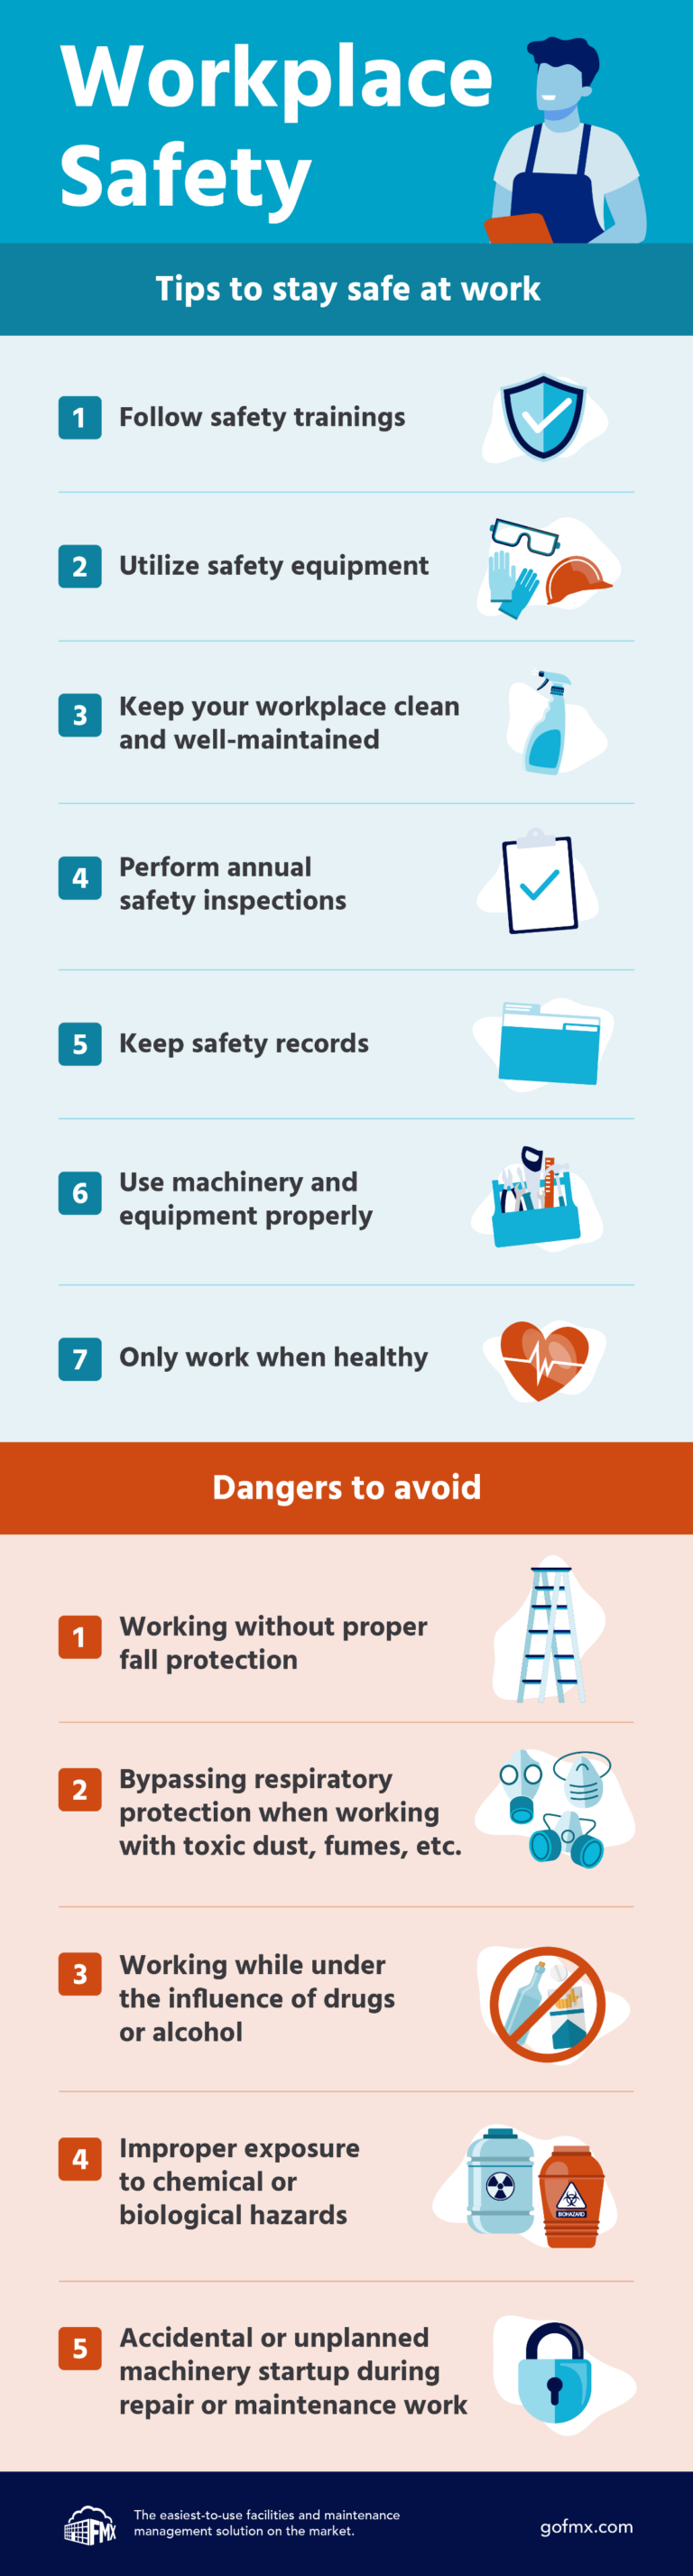 workplace safety tips infographic